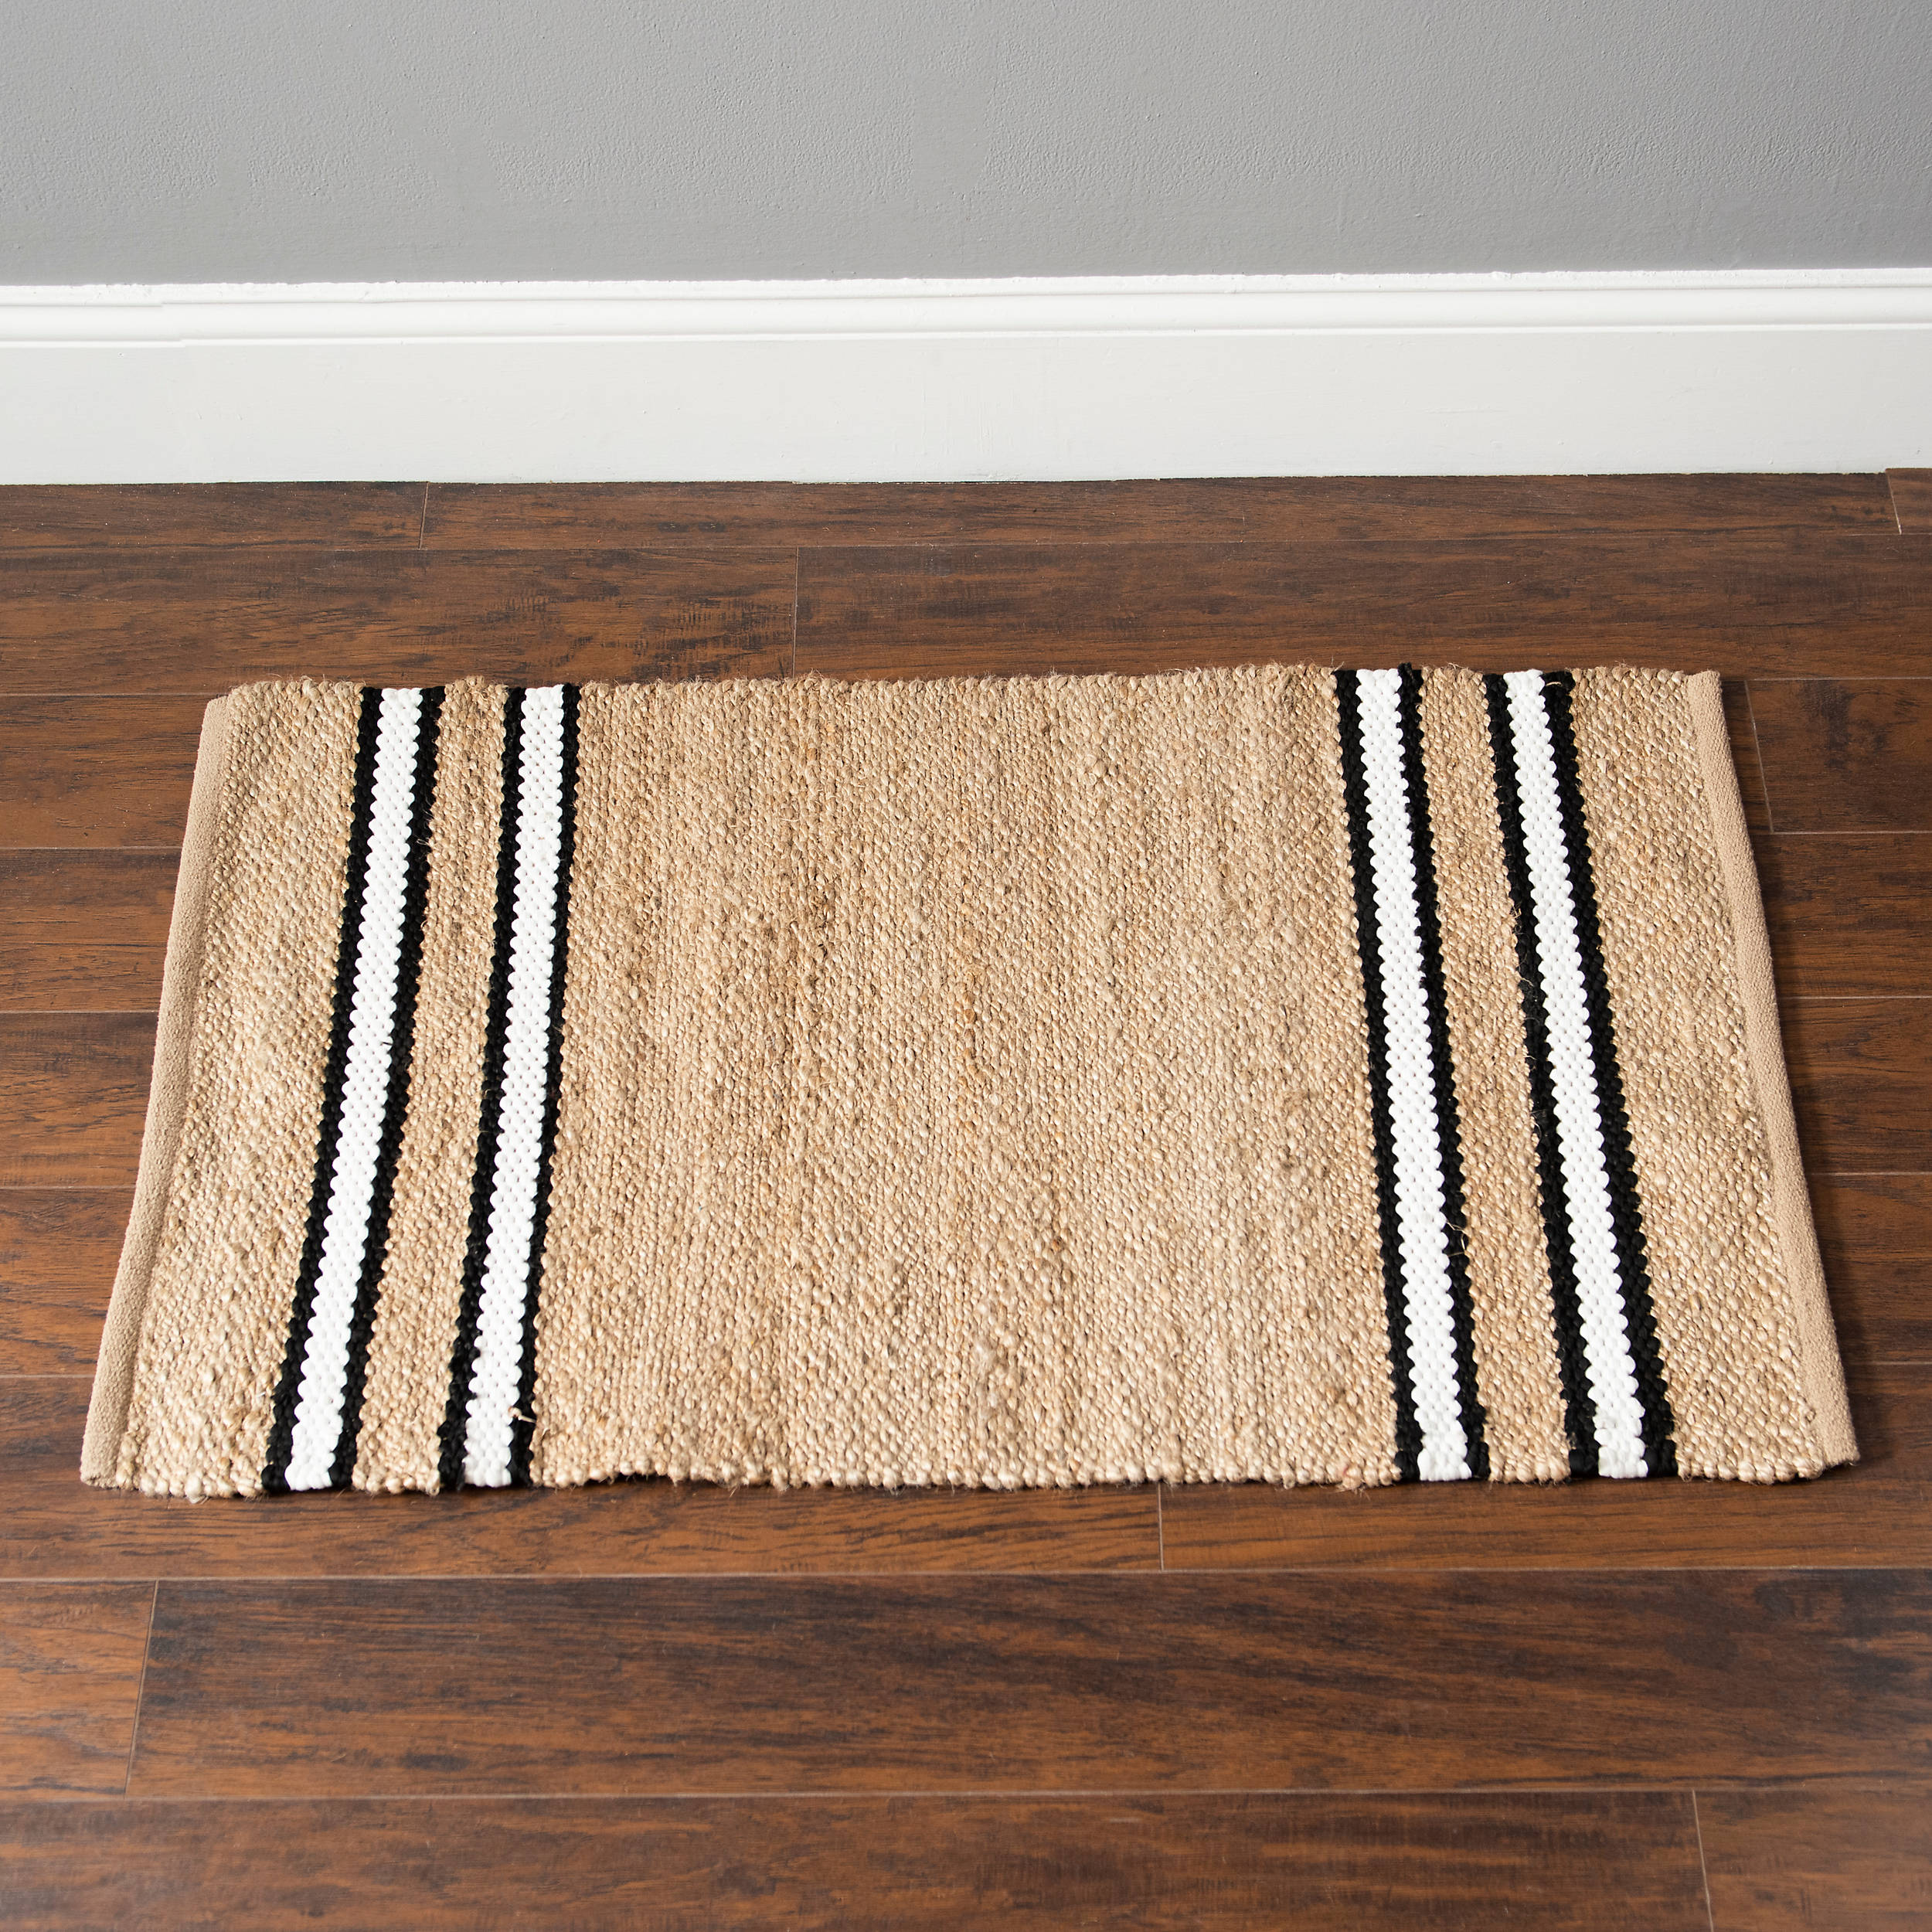 Shop Black and White Stripes Scatter Rug from Kirkland's on Openhaus